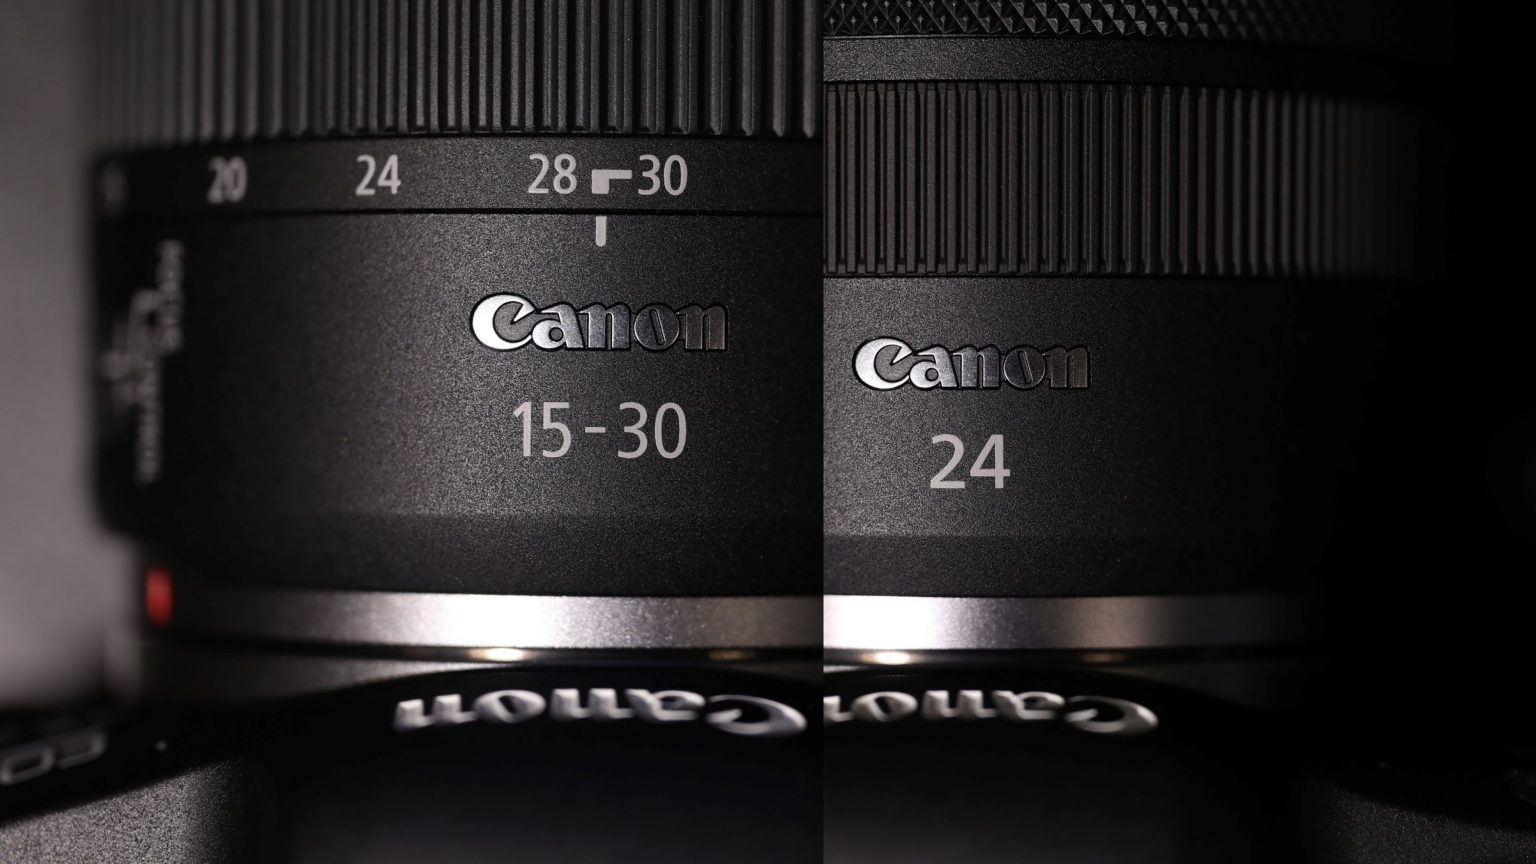 【Canon】本日発売！RF15-30mm F4.5-6.3 IS STM / RF24mm F1.8 MACRO IS STM